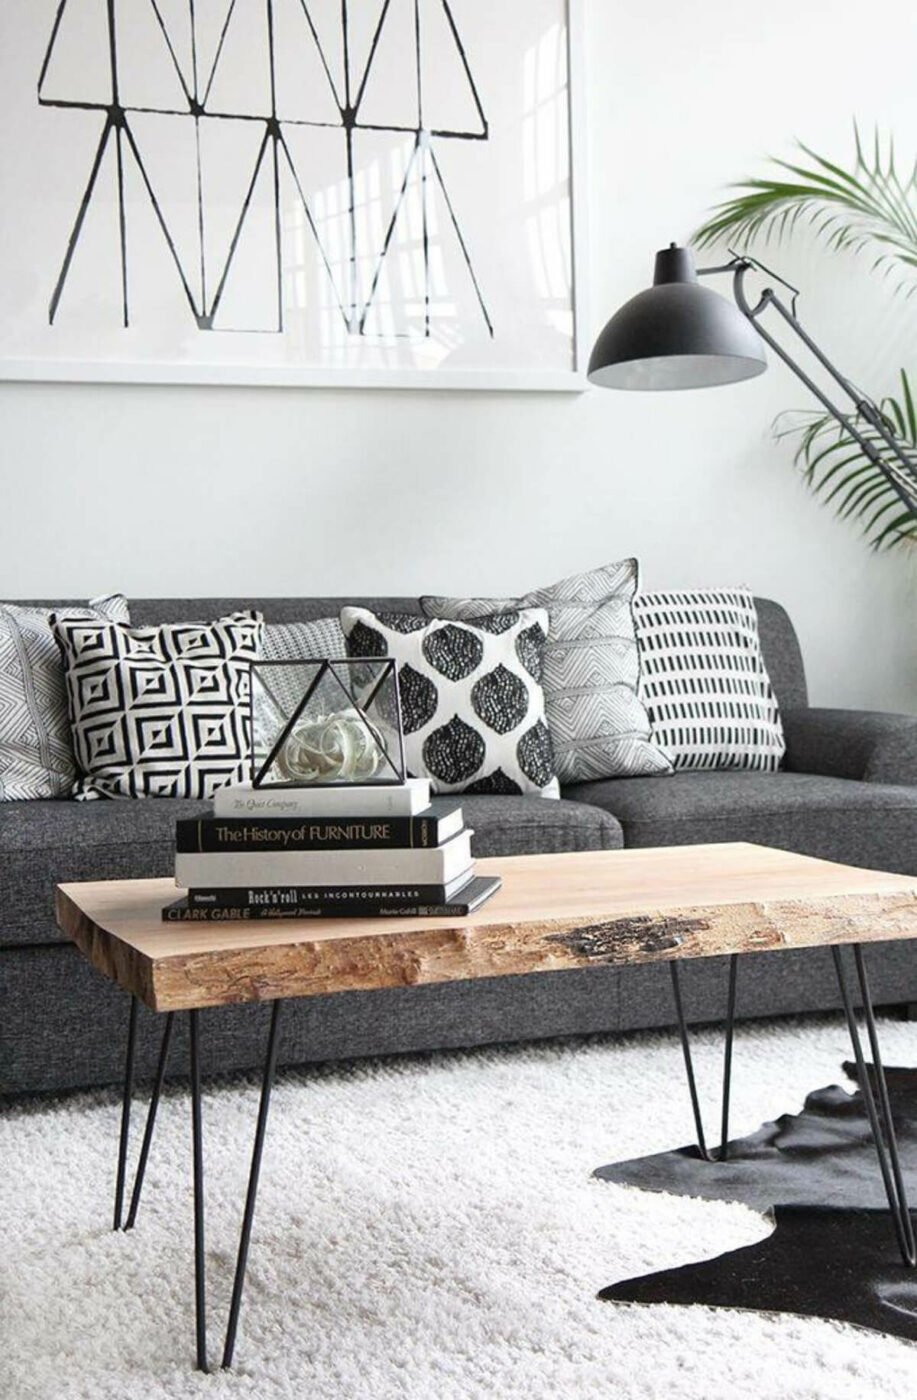 Wood-slab Statement Table and Black and White Book Display